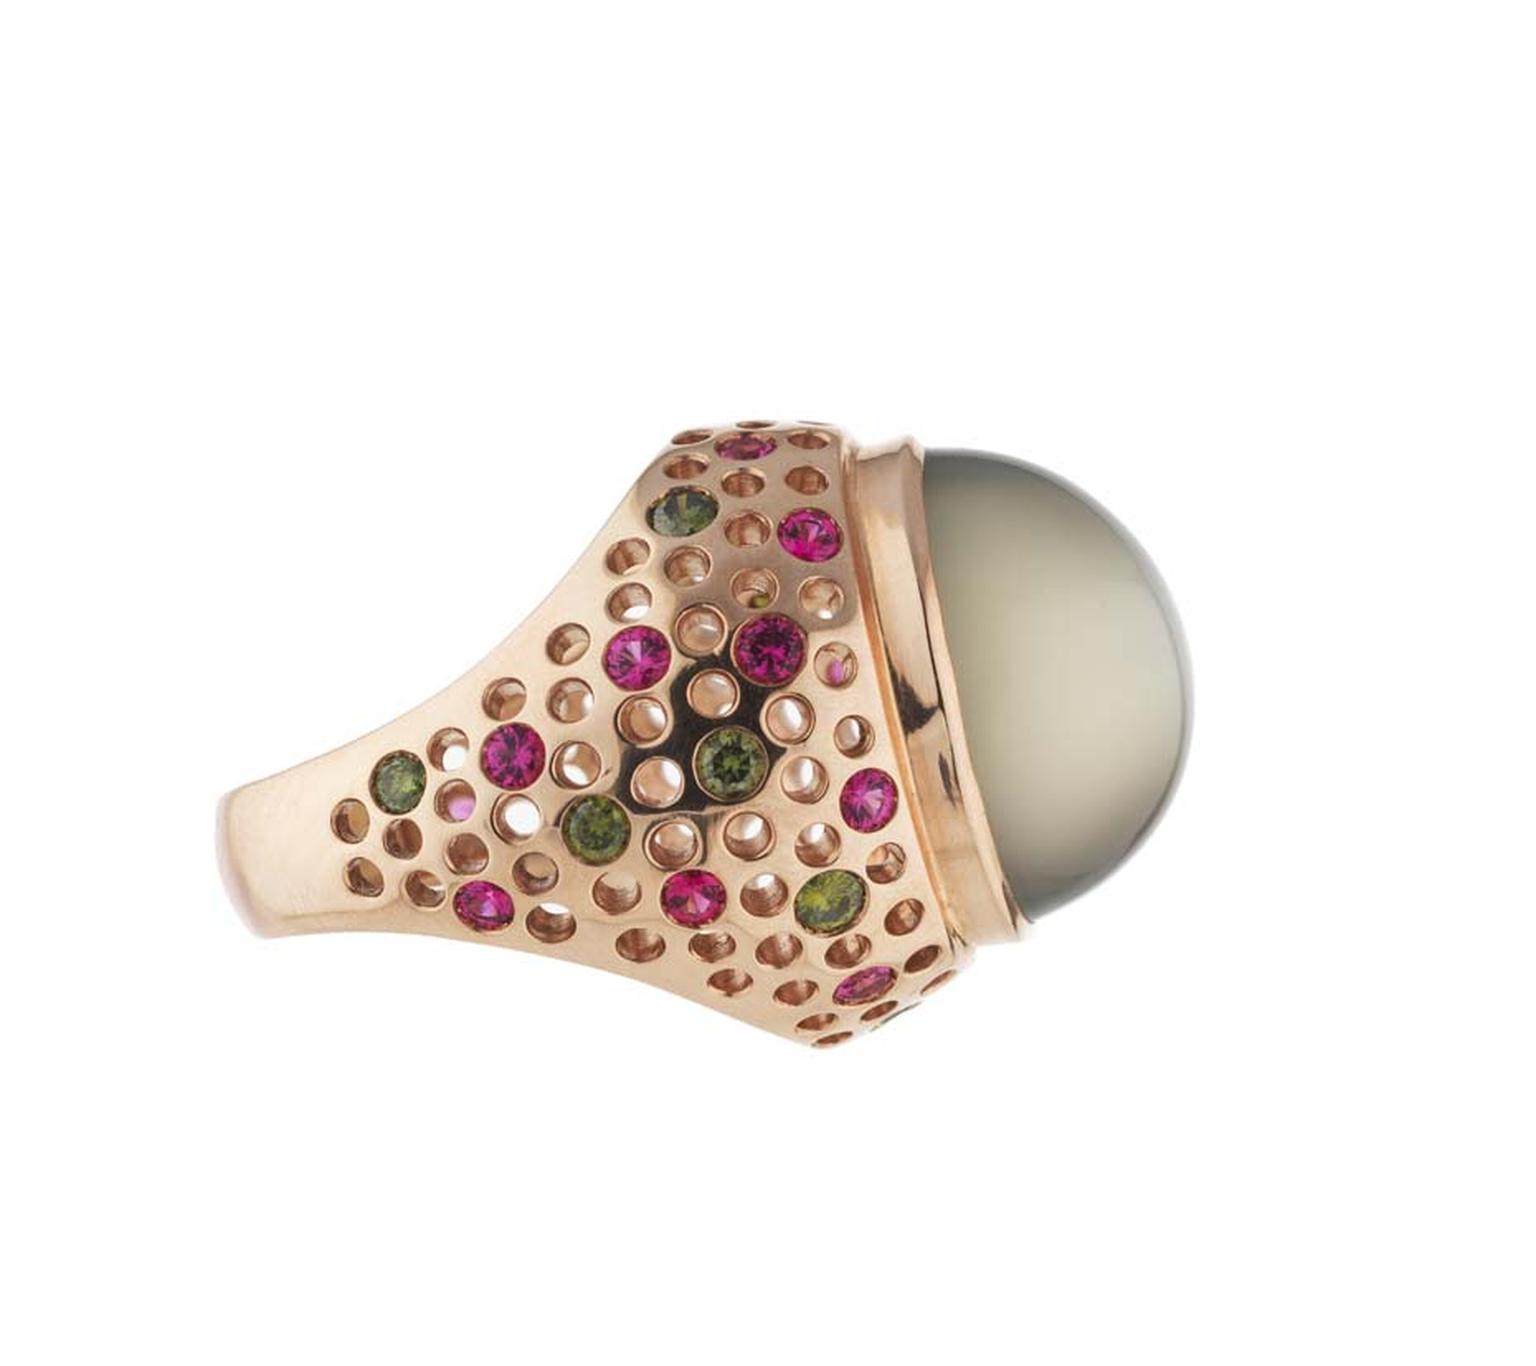 Holts Vivienne moonstone ring featuring a rose gold band studded with natural pink spinels and green diamonds.